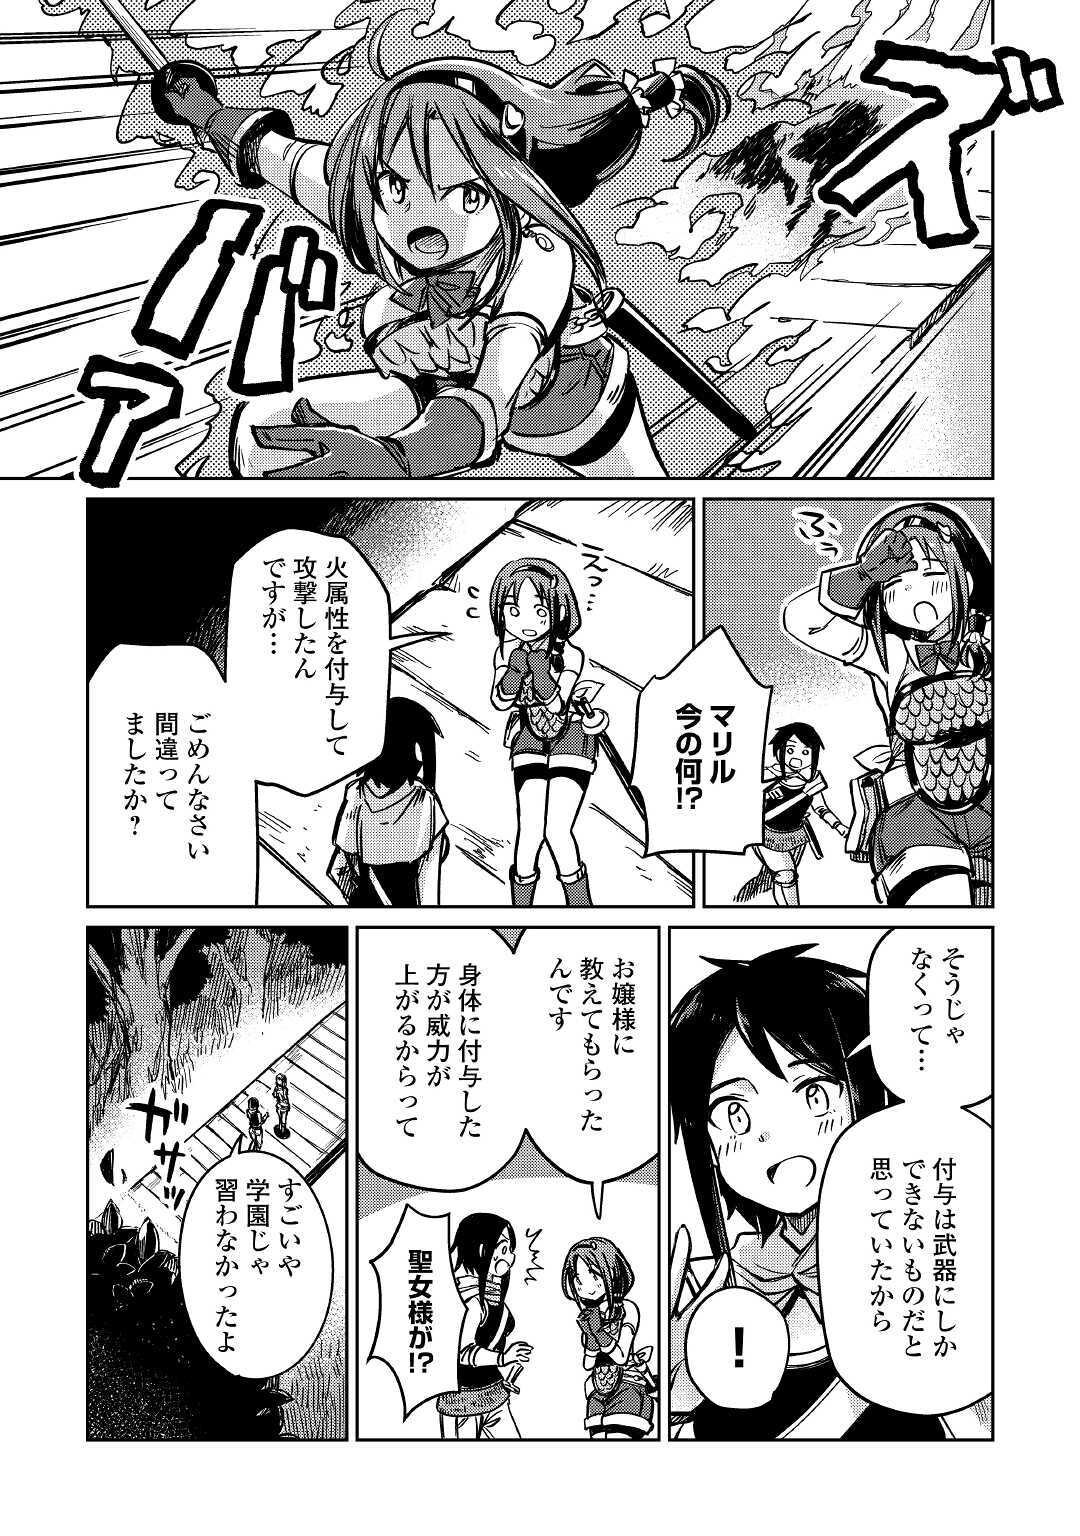 The Former Structural Researcher’s Story of Otherworldly Adventure 第26話 - Page 21